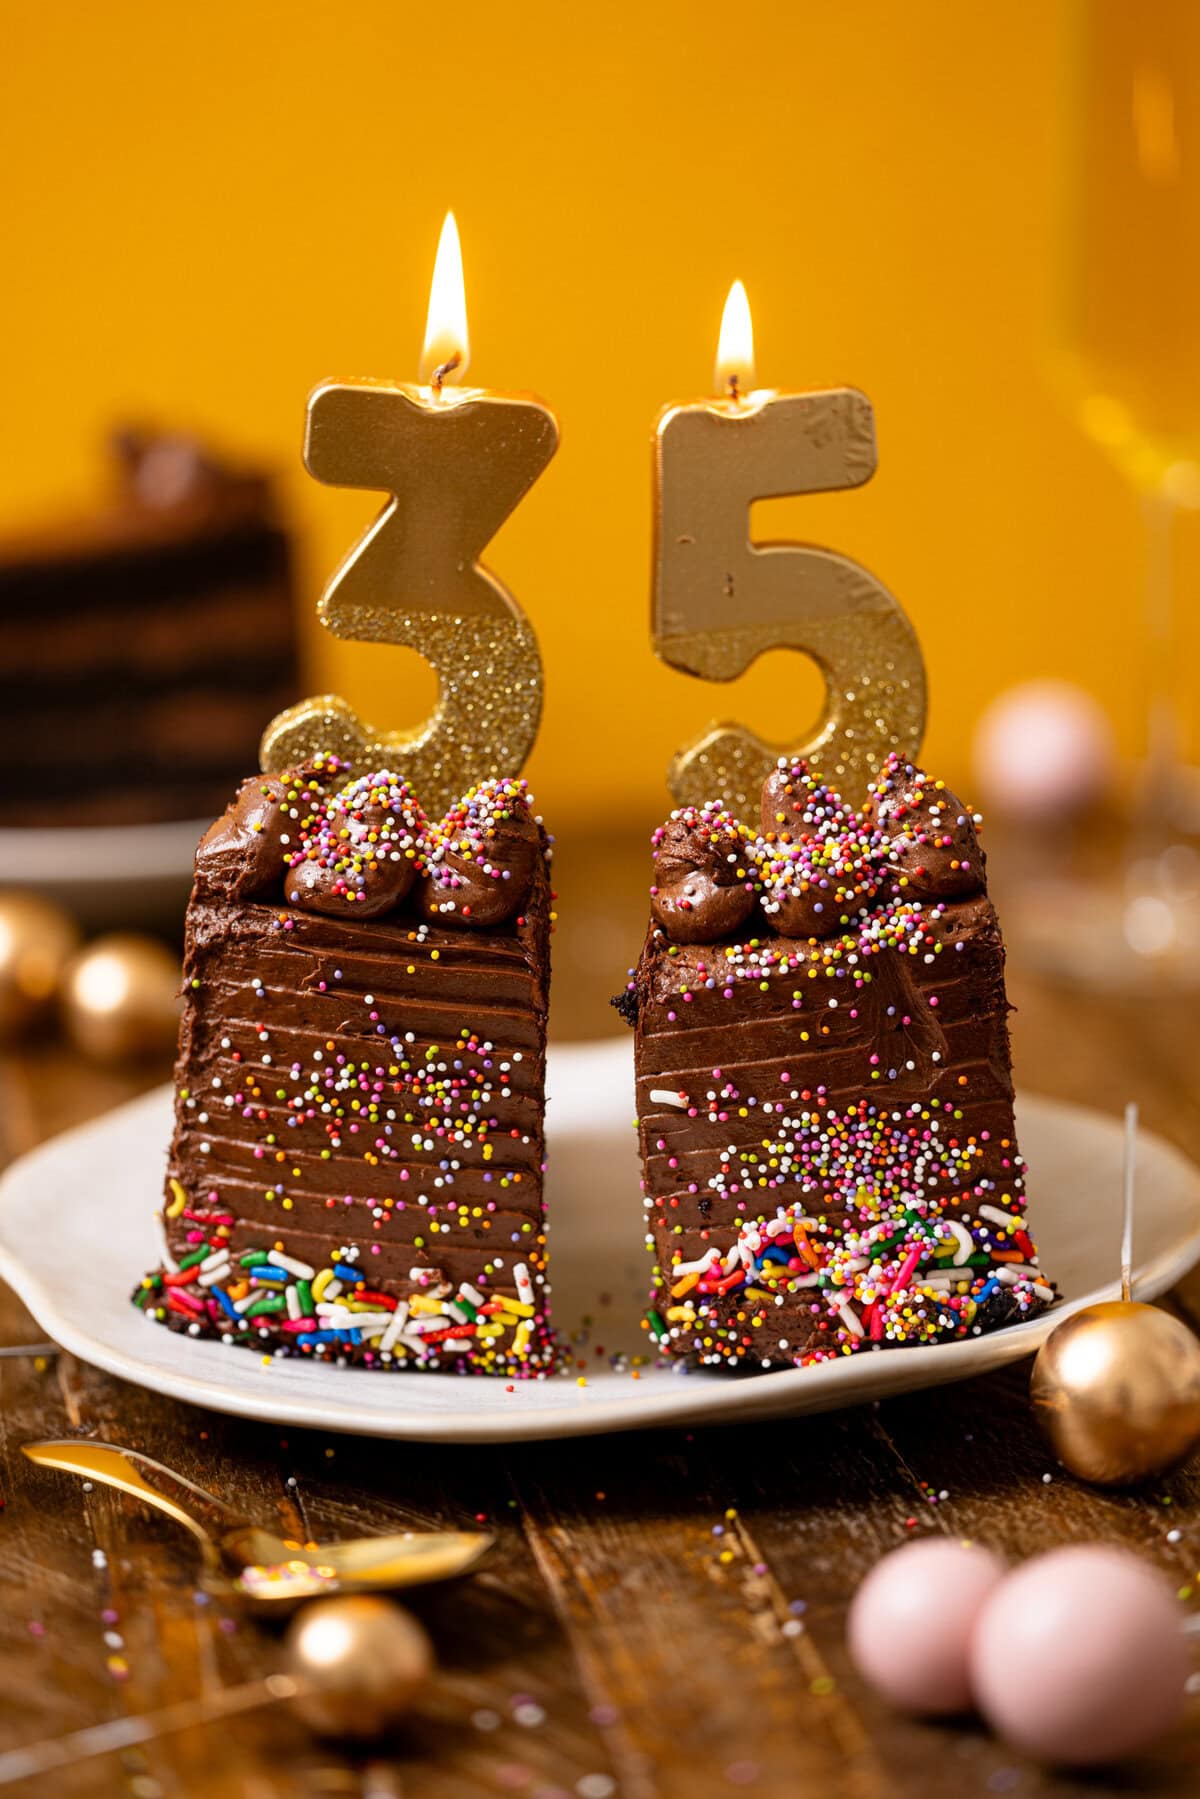 Forward shot of two cake slices with birthdays candles on a plate with a yellow background.